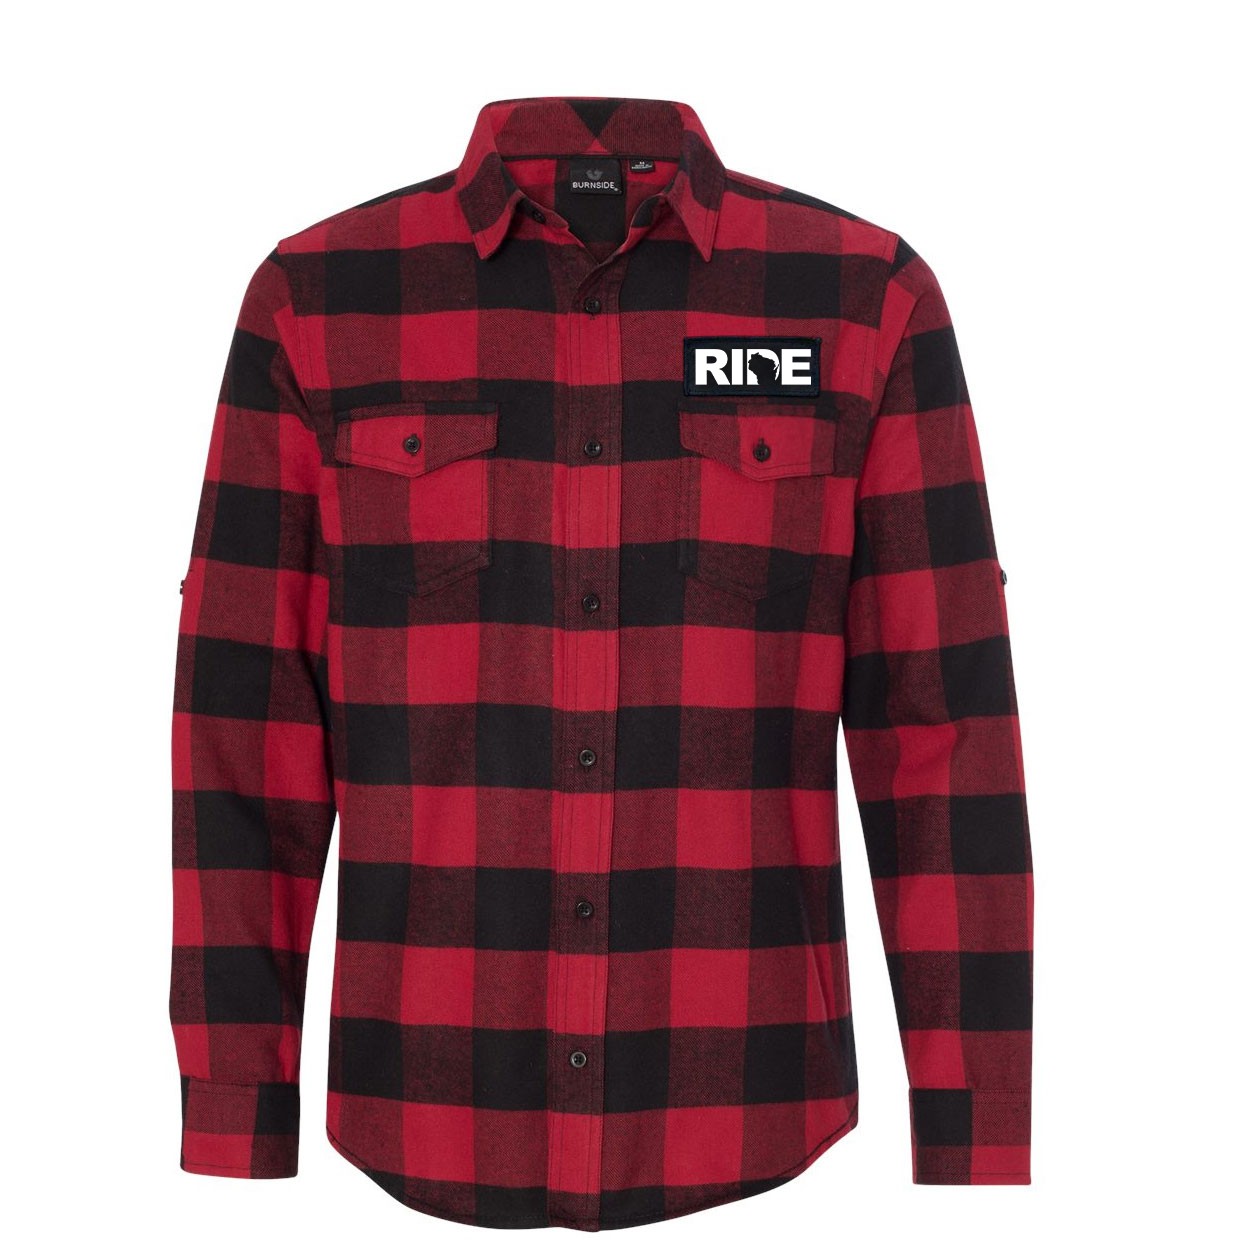 Ride Wisconsin Classic Unisex Long Sleeve Woven Patch Flannel Shirt Red/Black Buffalo (White Logo)